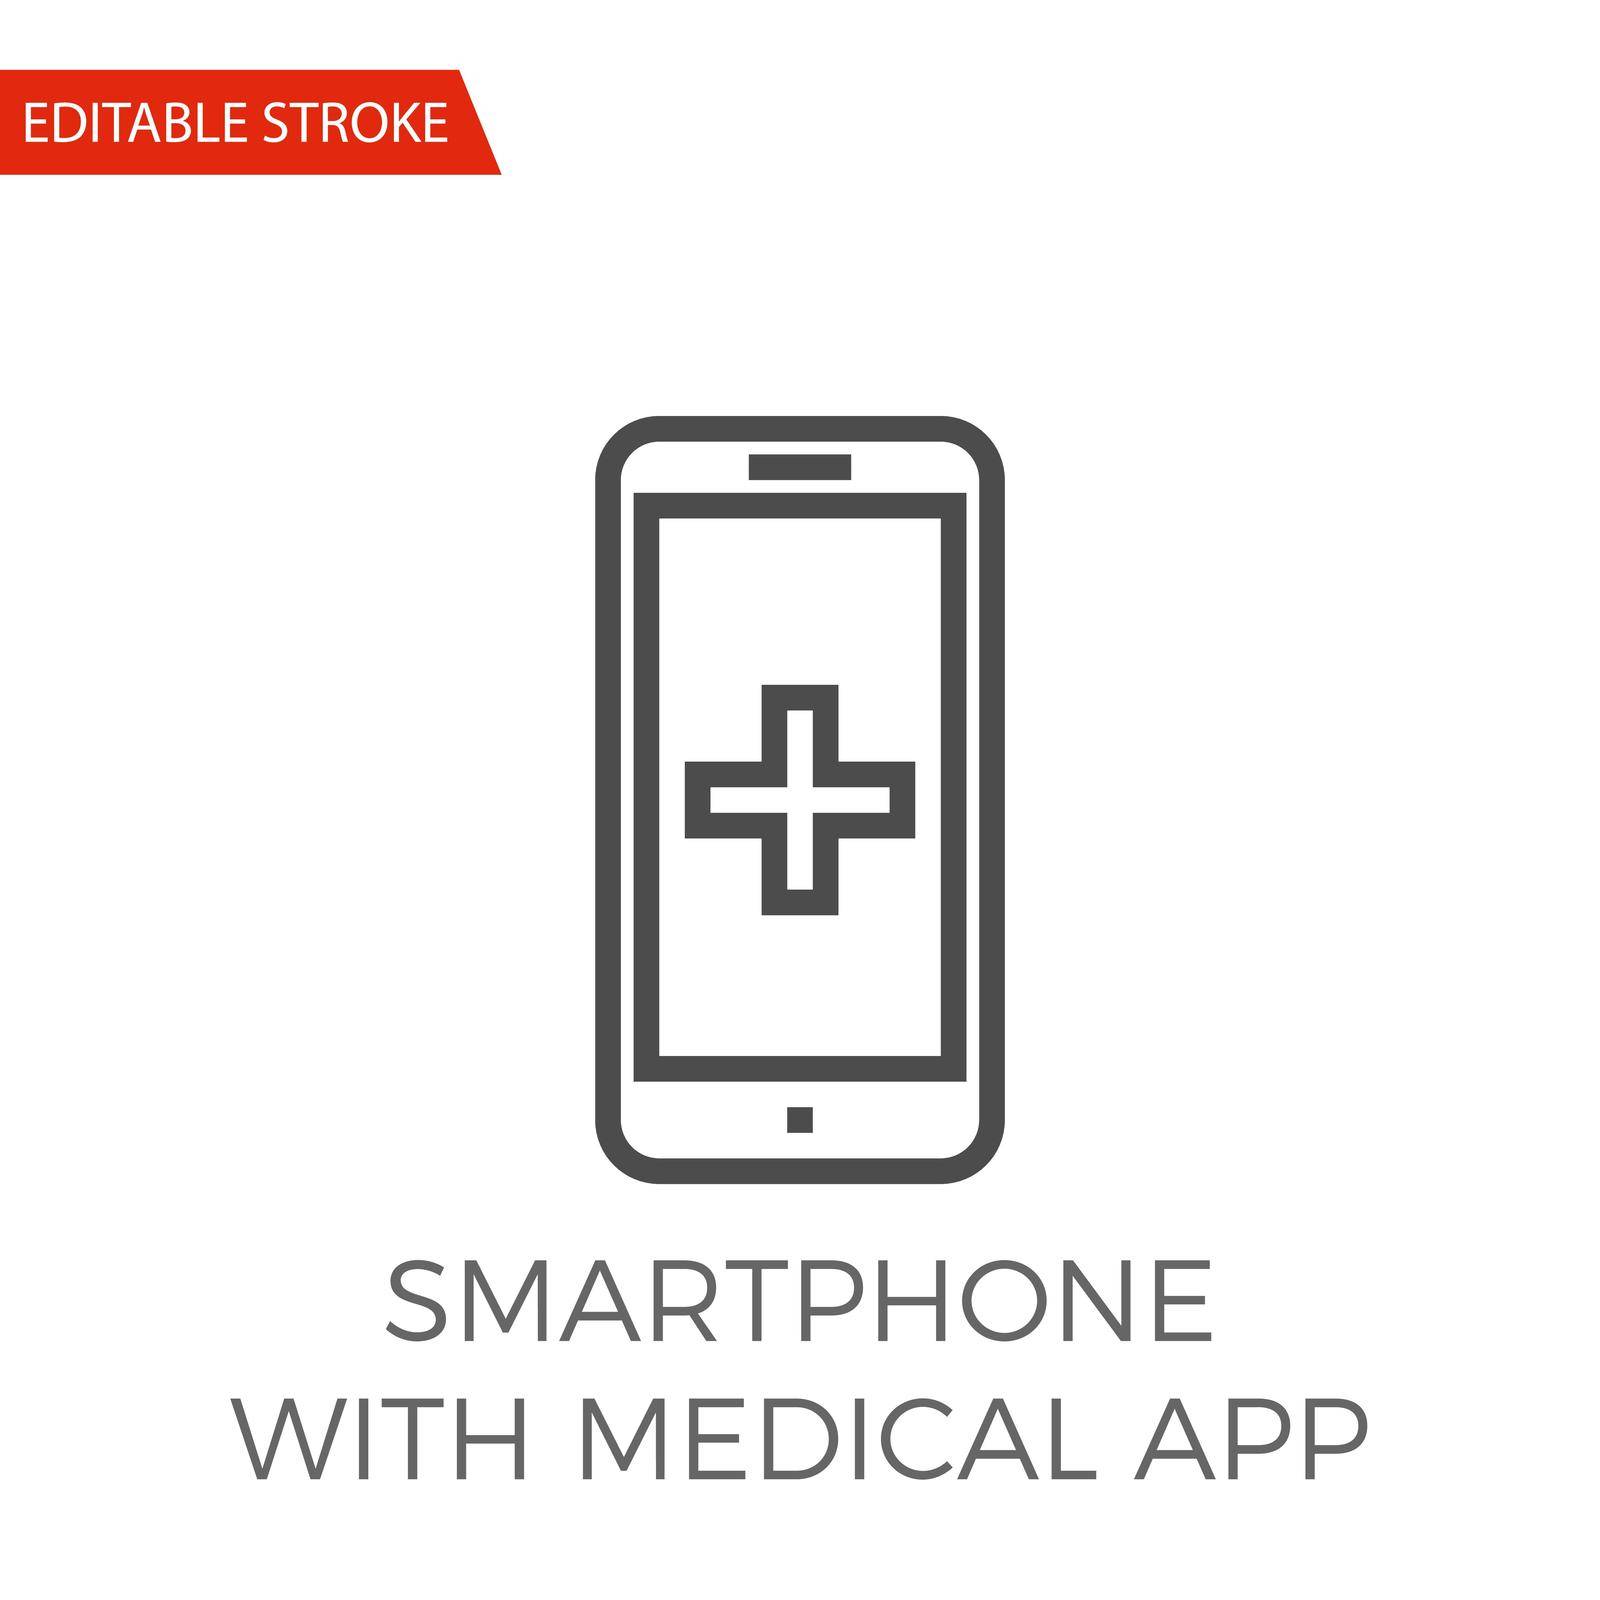 Smartphone with Medical App Thin Line Vector Icon. Flat Icon Isolated on the White Background. Editable Stroke EPS file. Vector illustration.